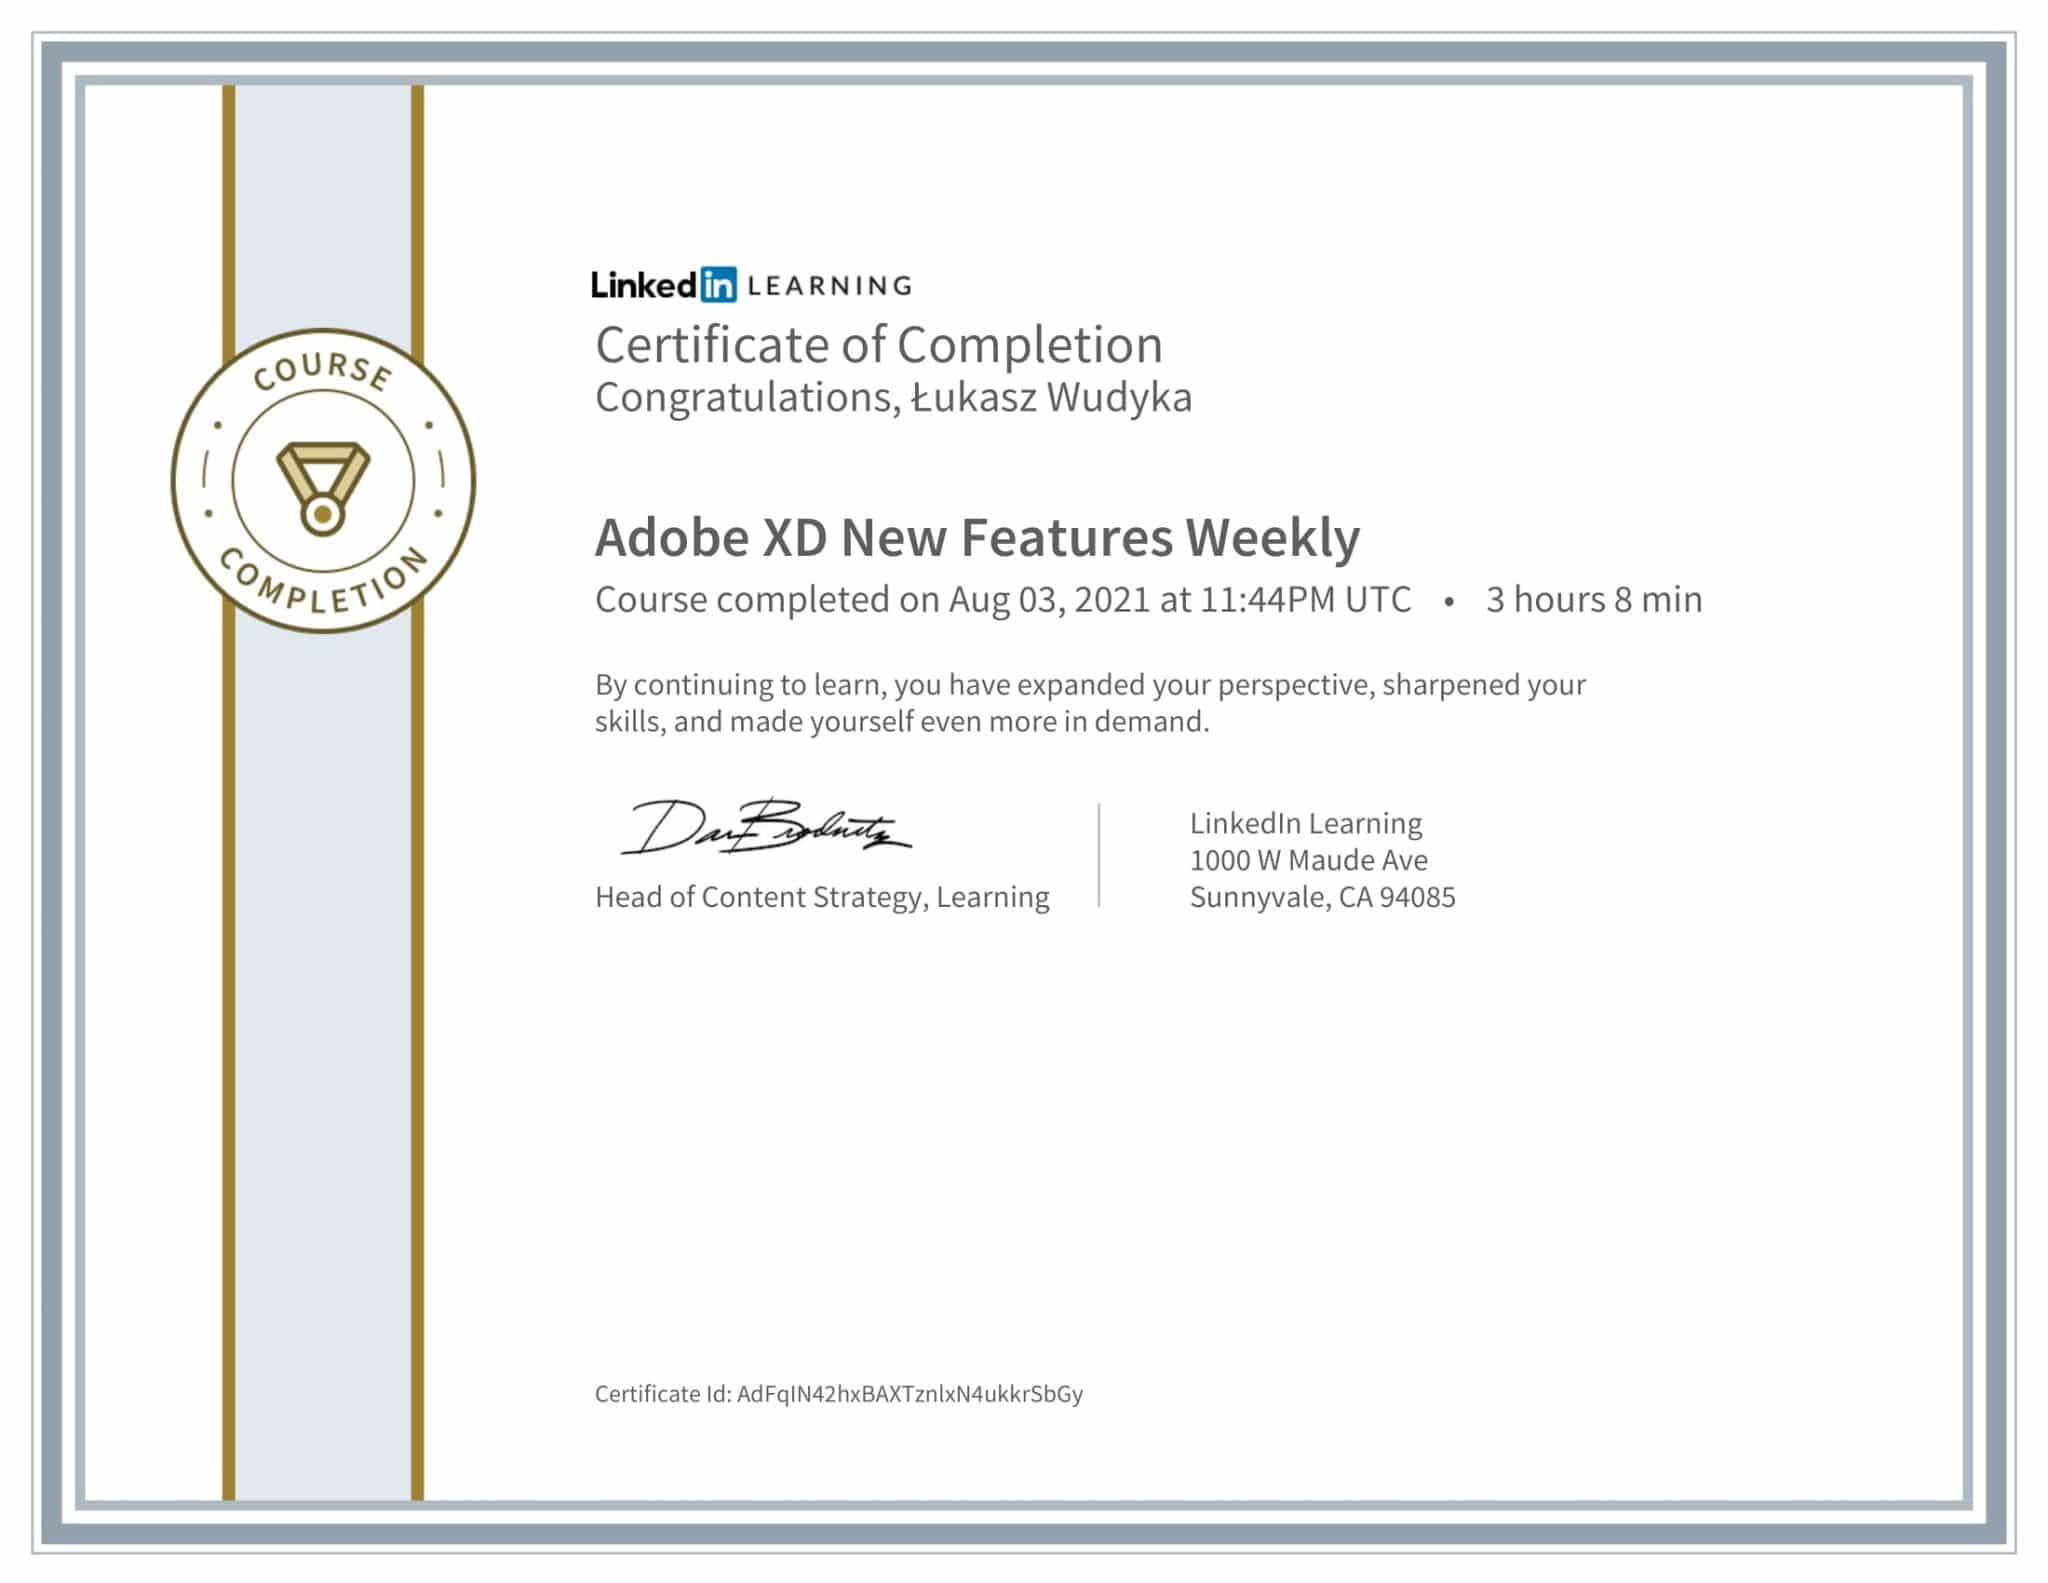 CertificateOfCompletion_Adobe XD New Features Weekly-1